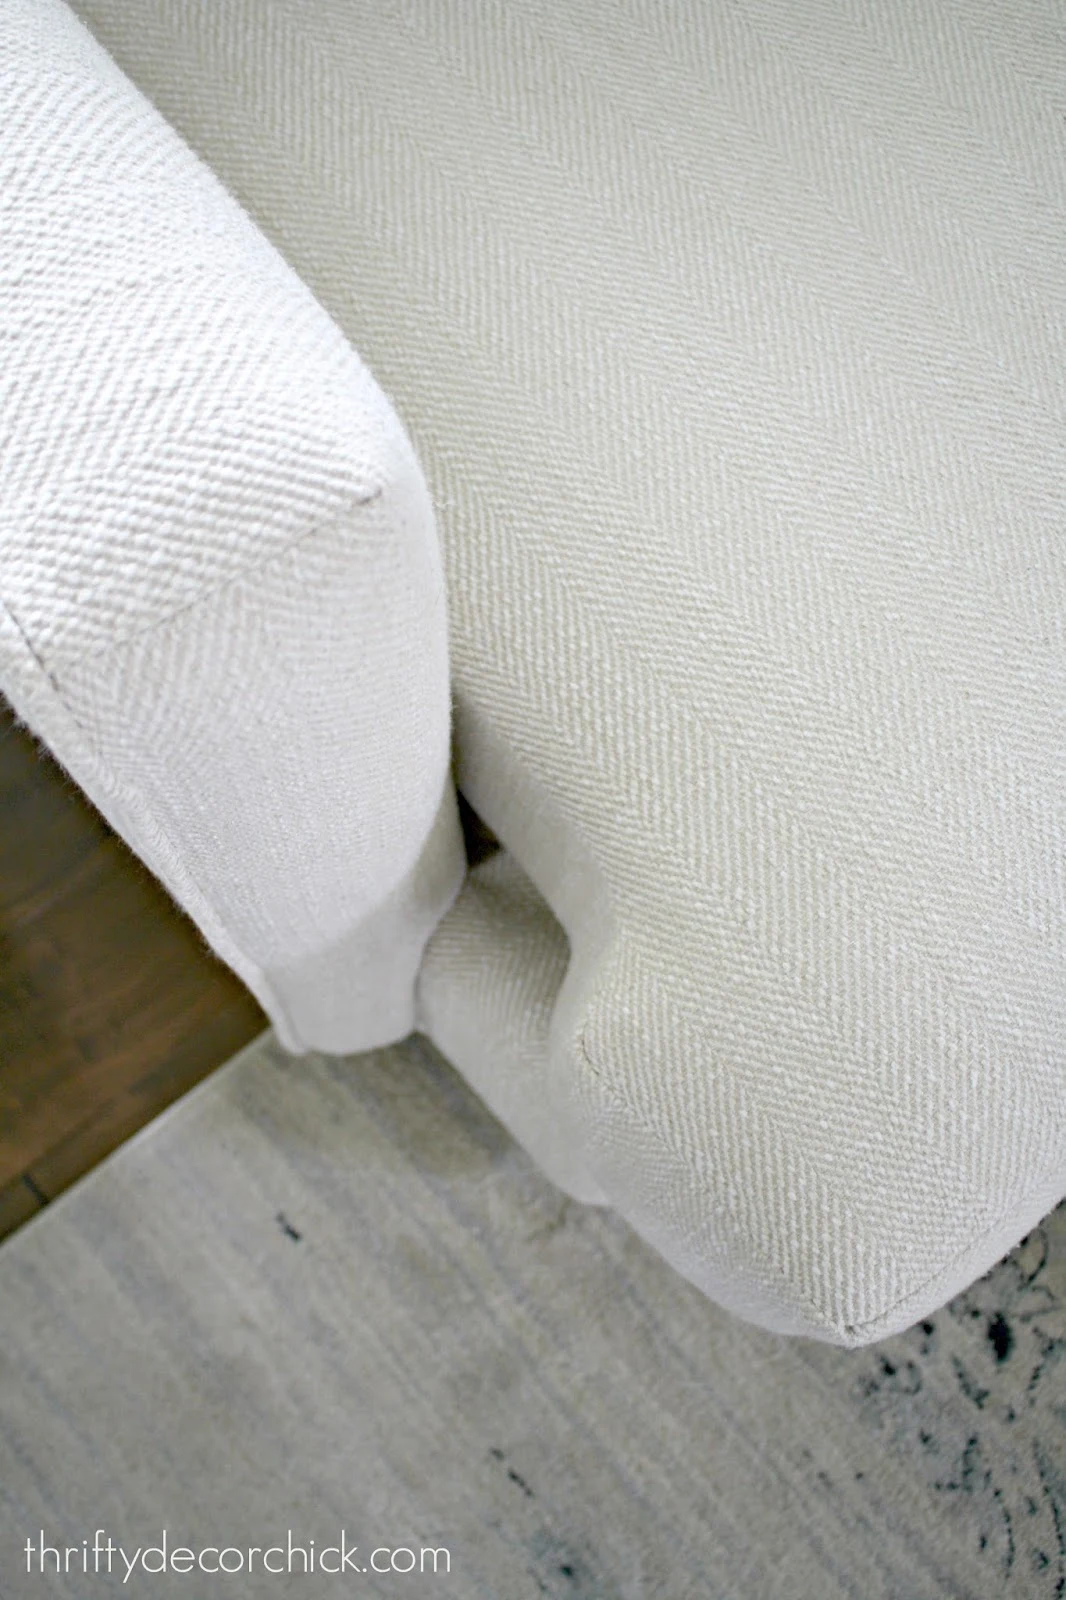 How to Stop Sofa Cushions from Slipping with Velcro Tape - The